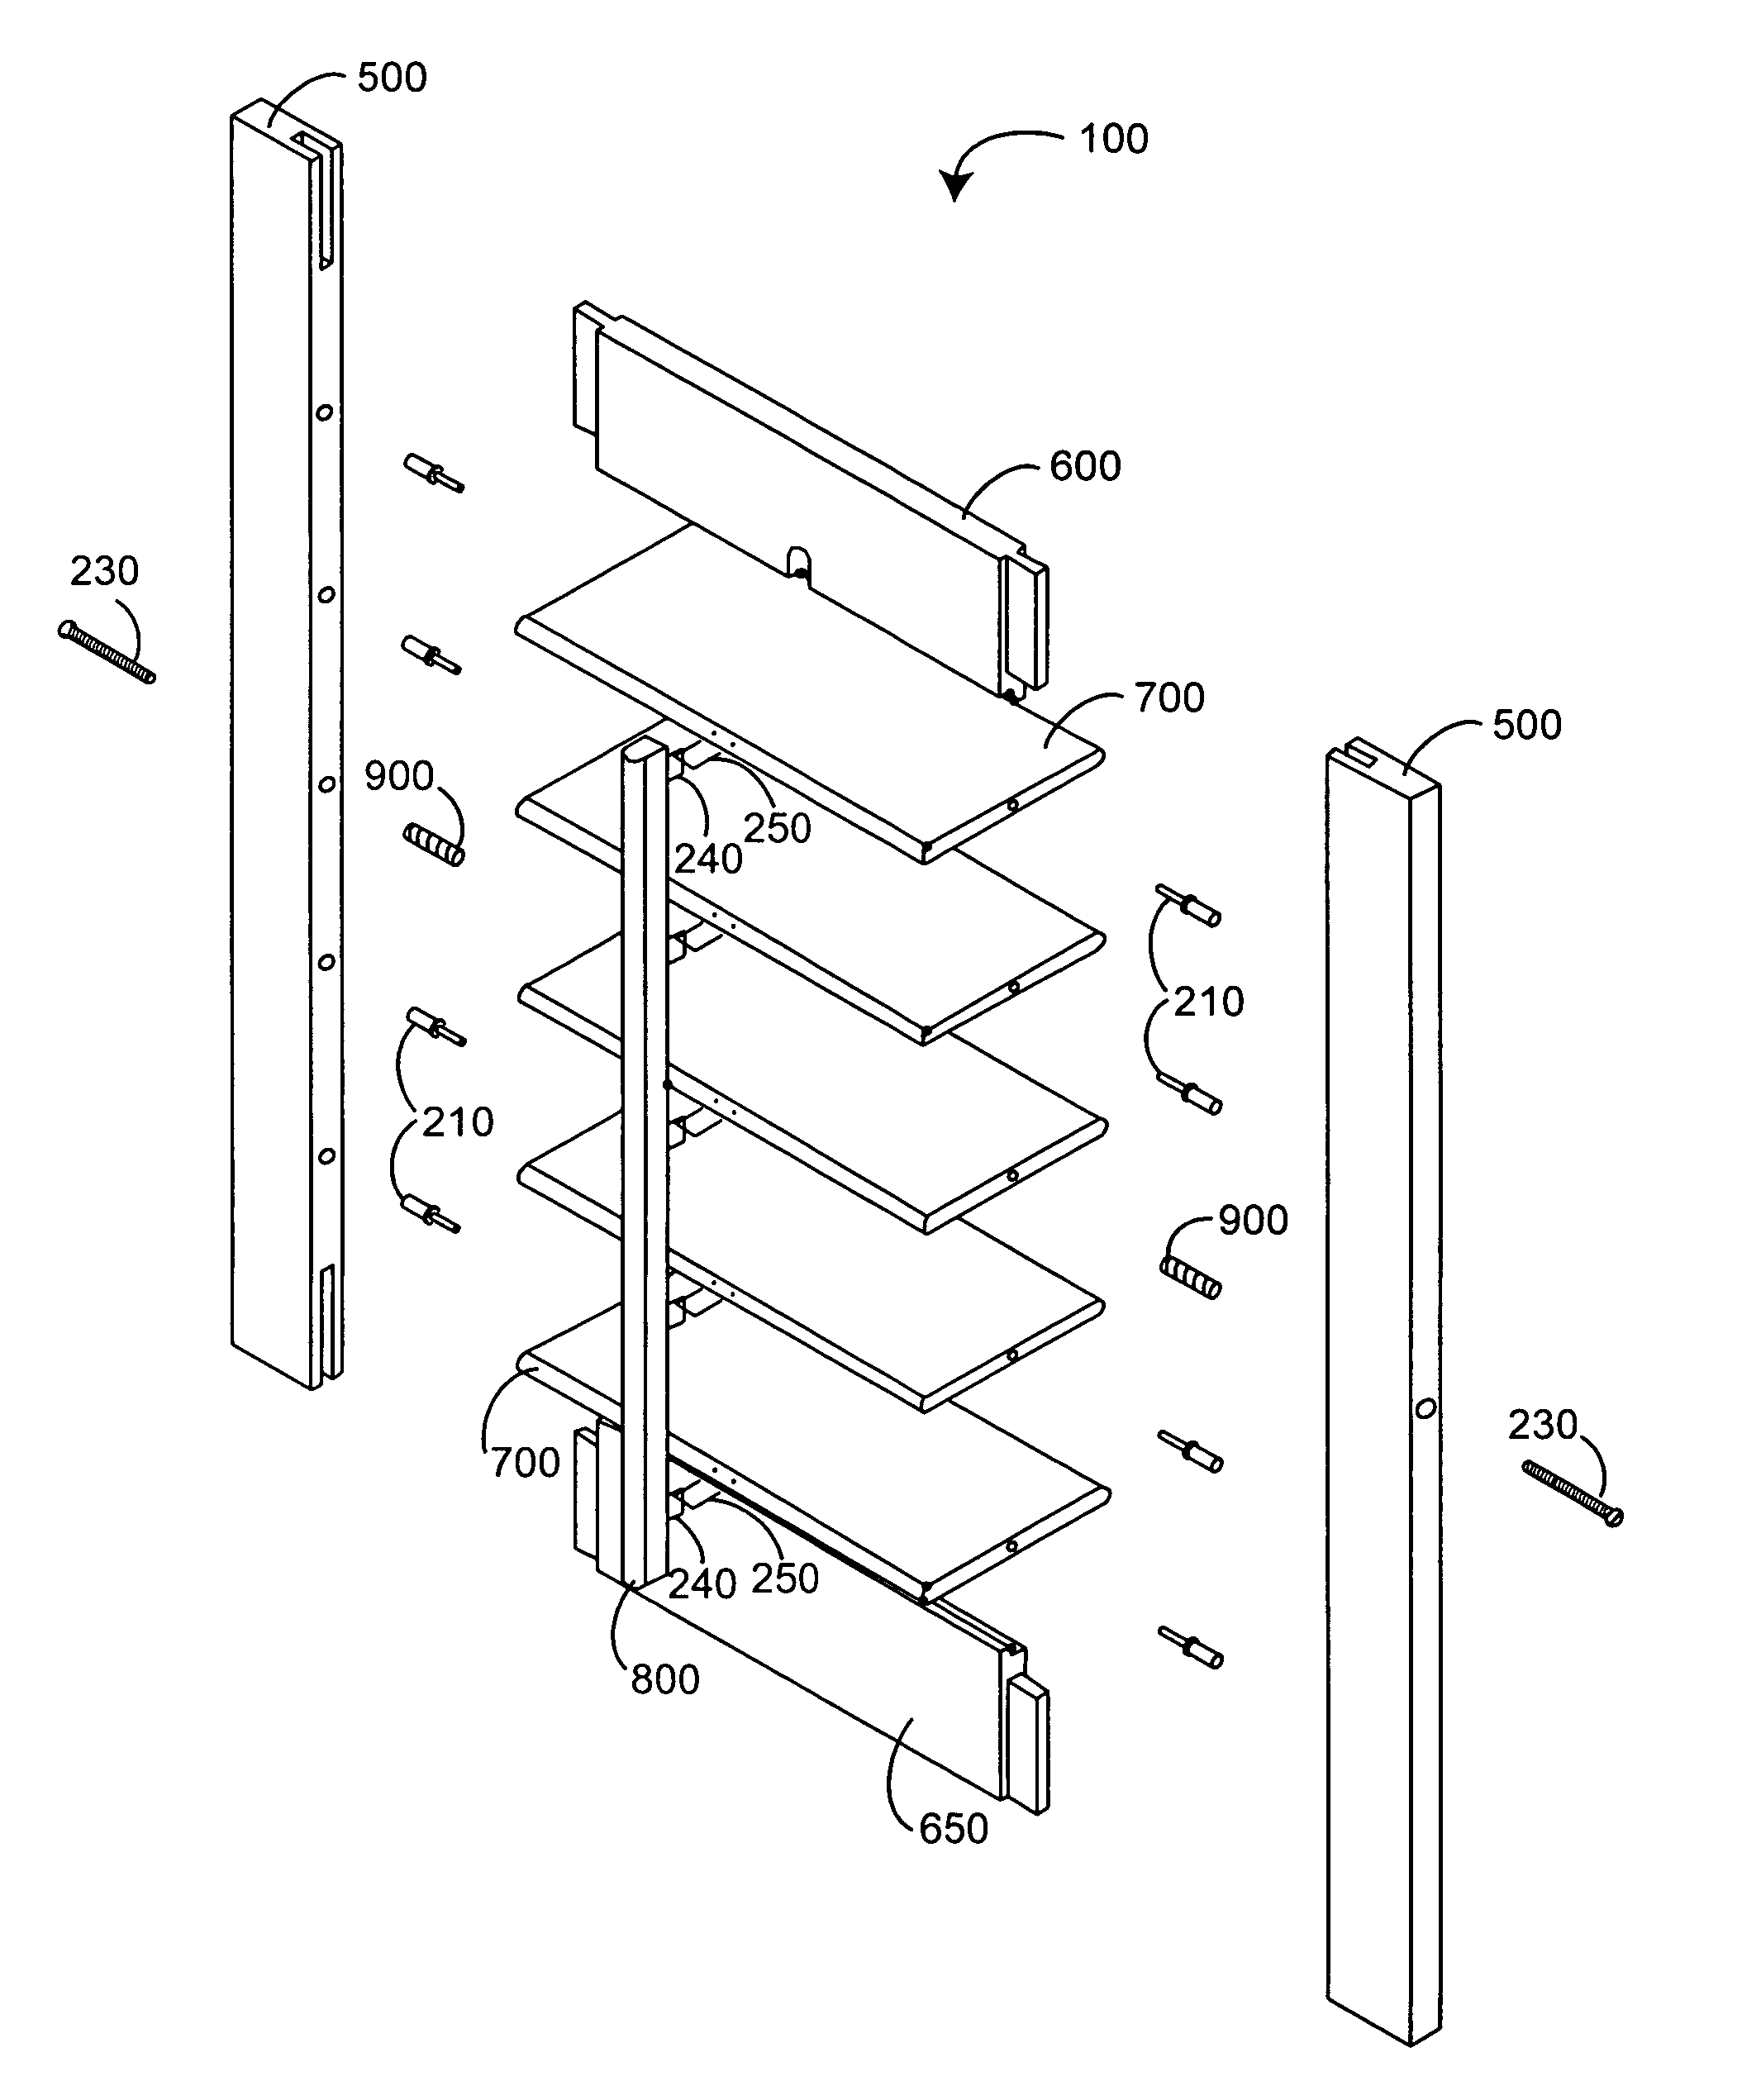 Removable louver shutter assembly method